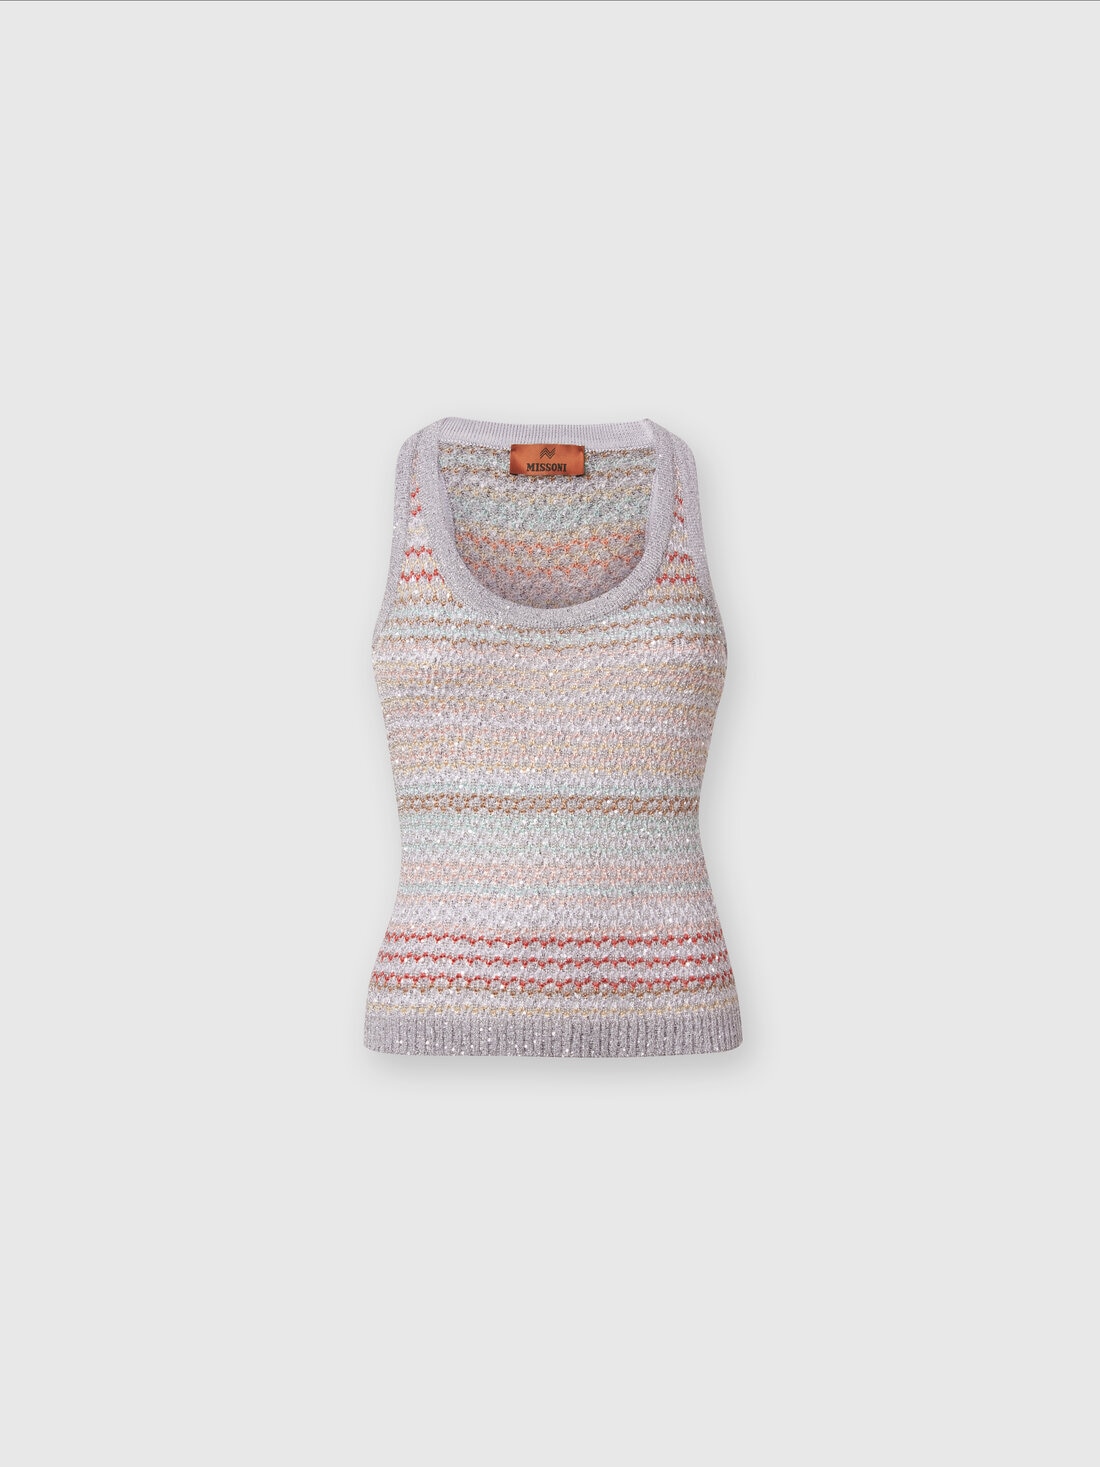 Tank top in mesh knit with sequin appliqué , Multicoloured  - DS24SK0JBK033PSM9AI - 0